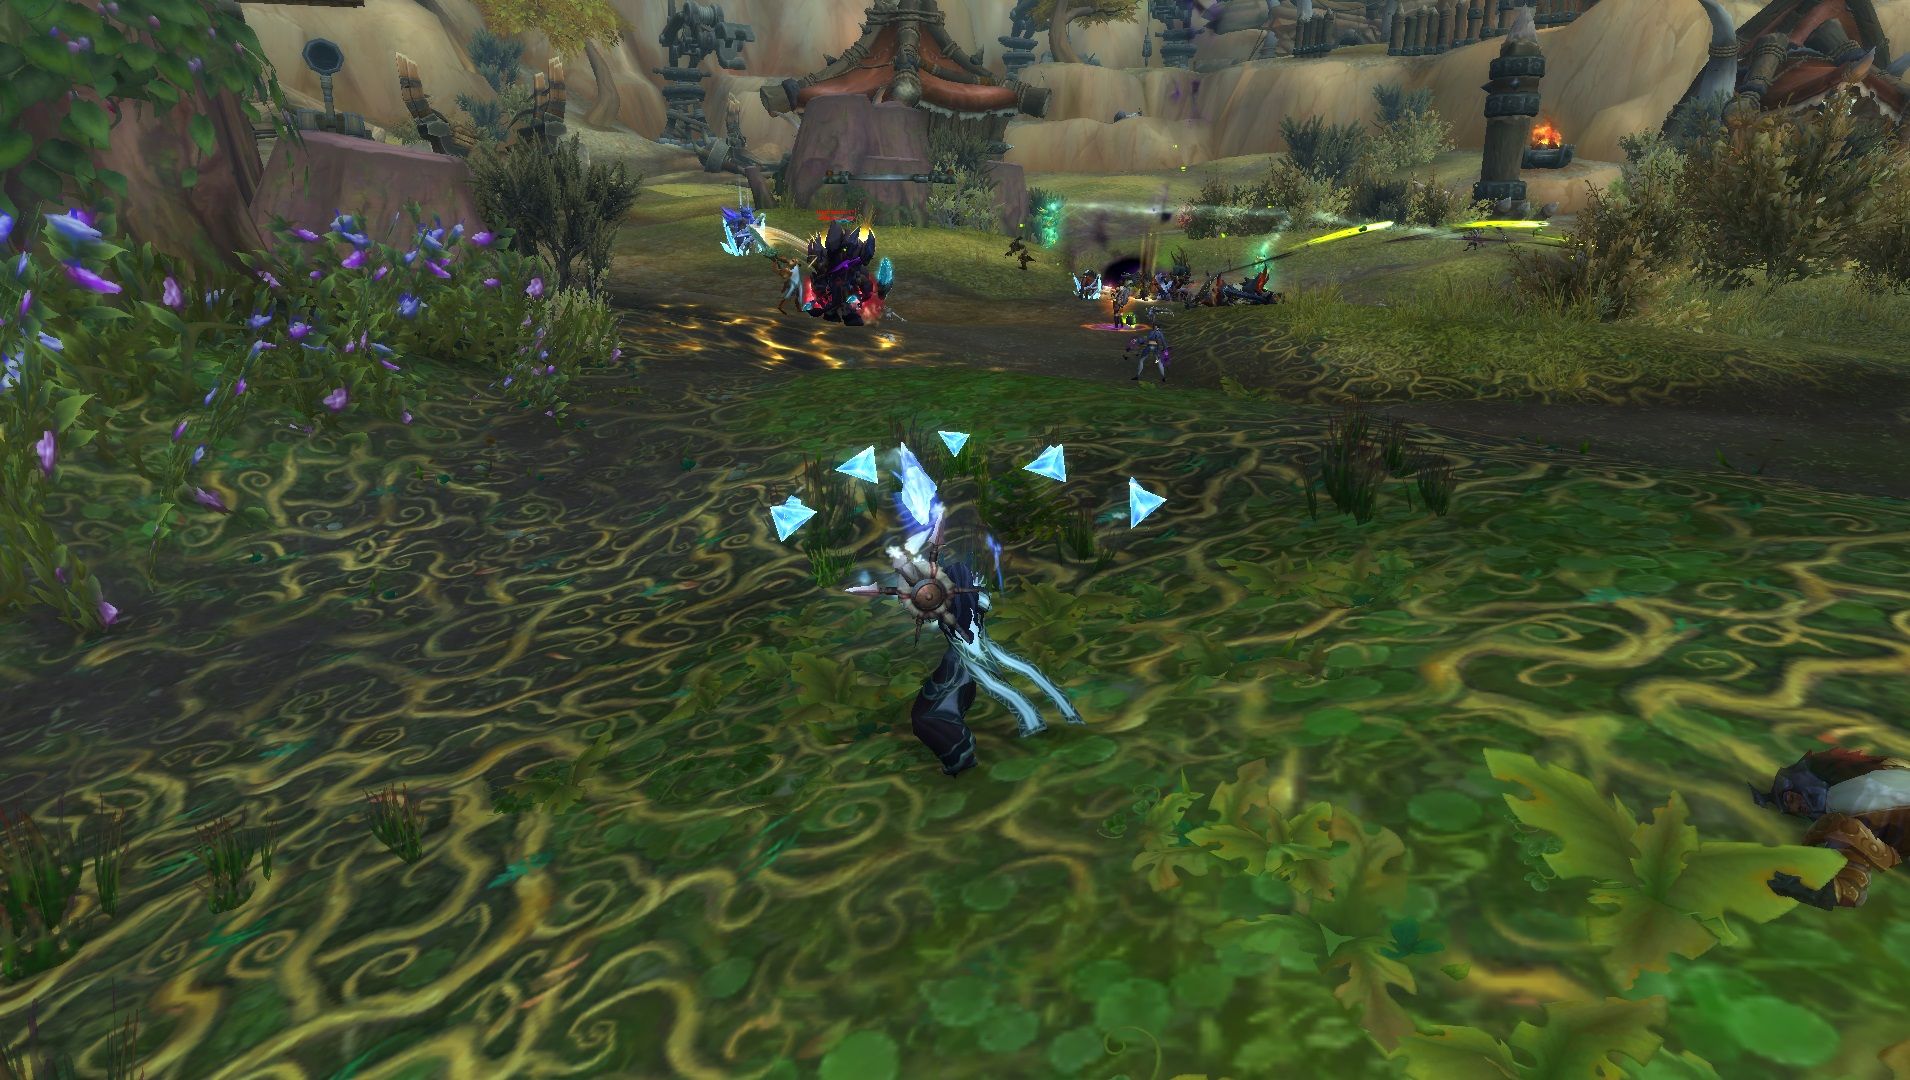 A Frost Mage fighting in a PvP battleground in World of Warcraft.